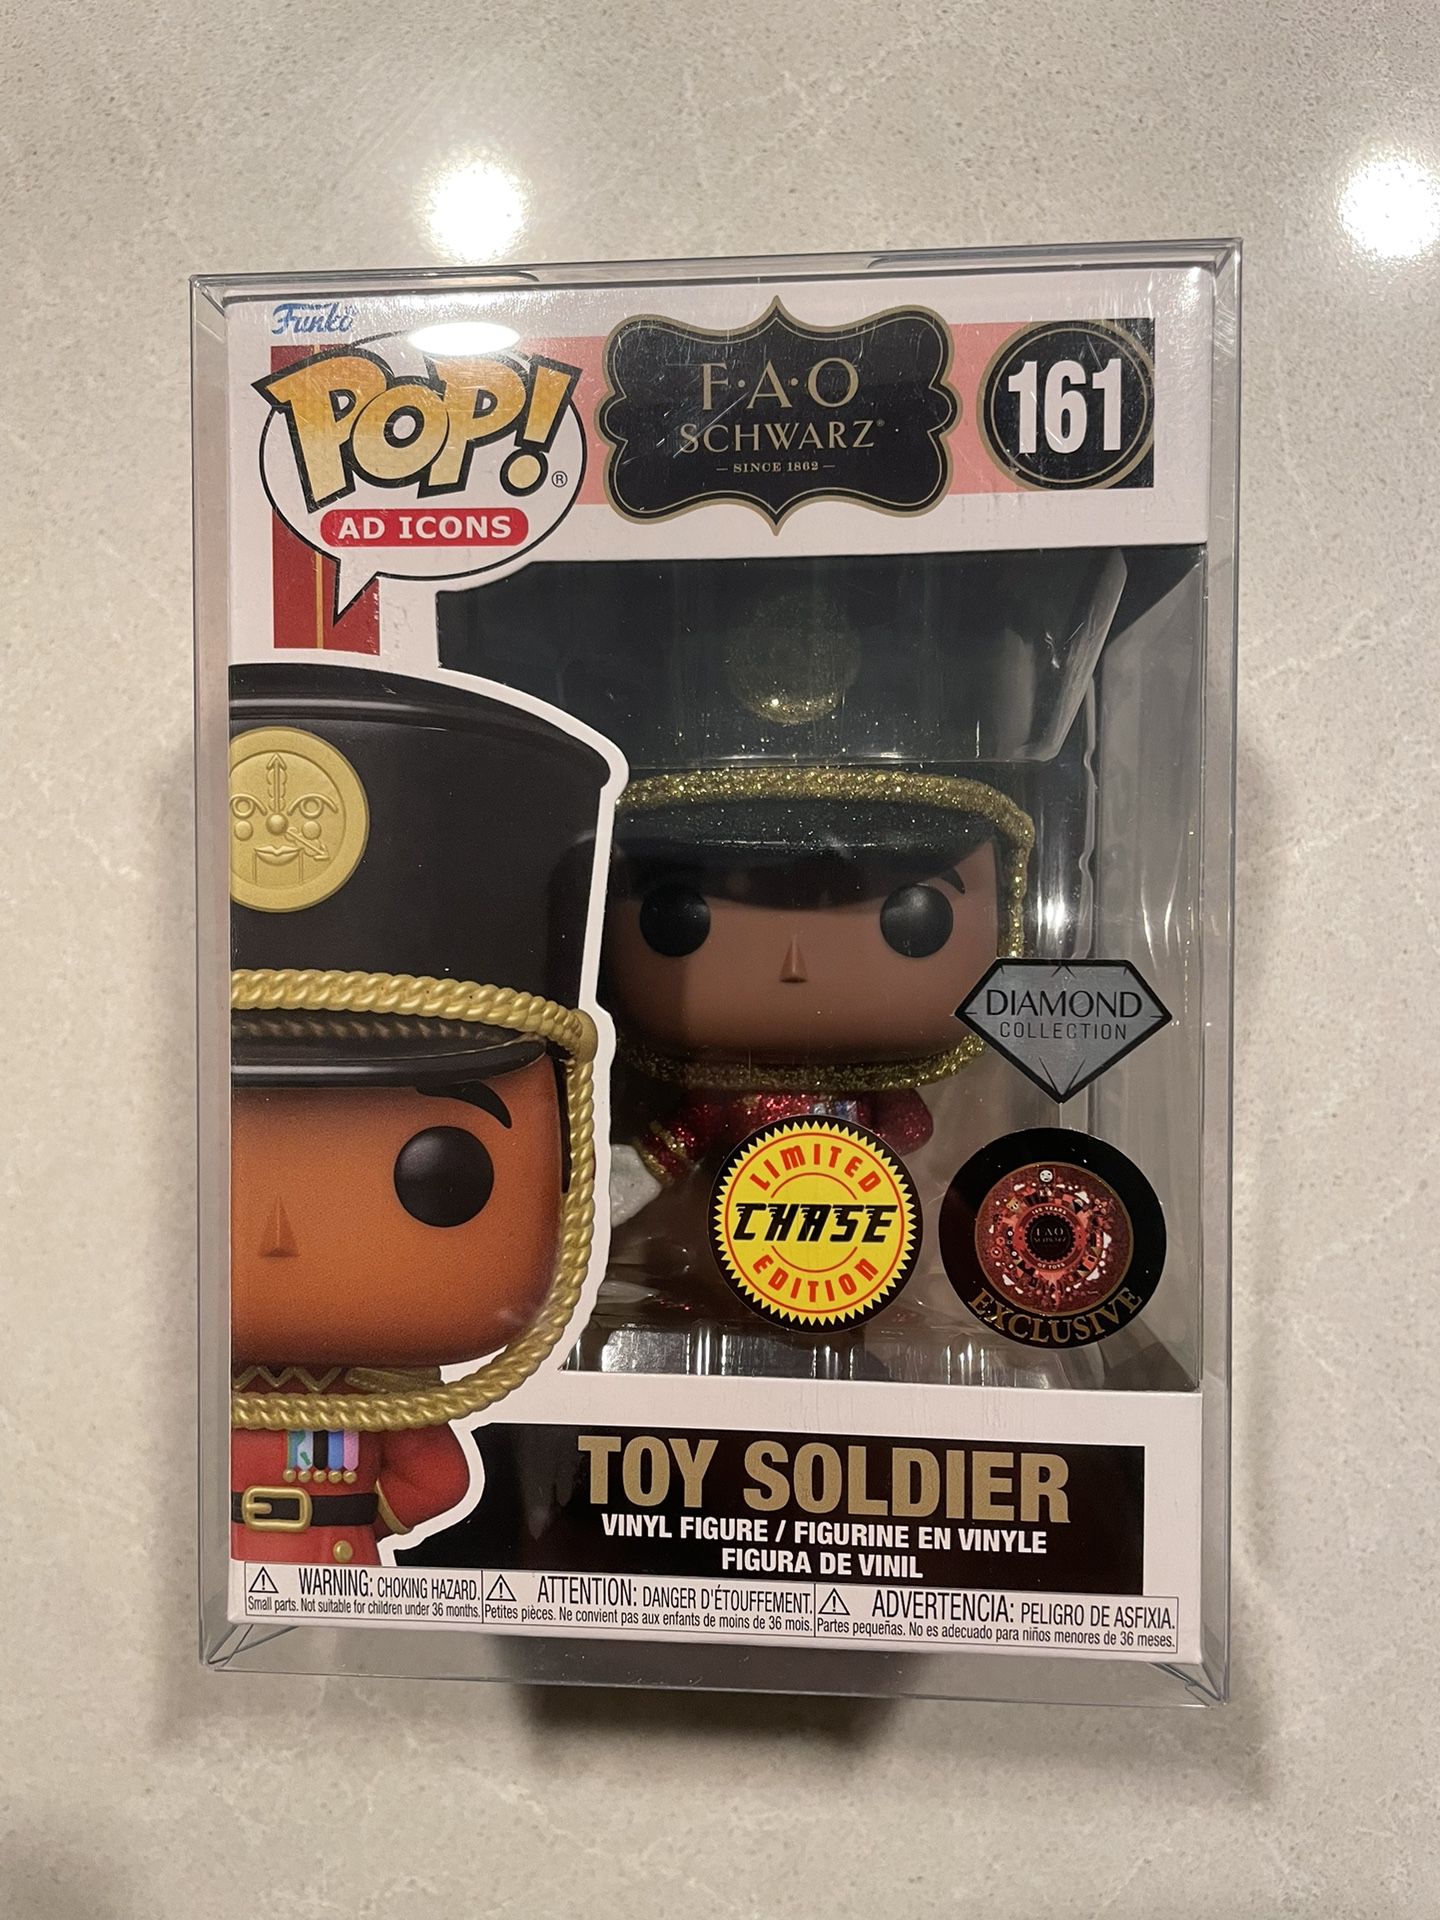 Diamond Toy Soldier CHASE Funko Pop *MINT* Target Exclusive FAO Schwarz Ad Icons 161 with protector F.A.O. 